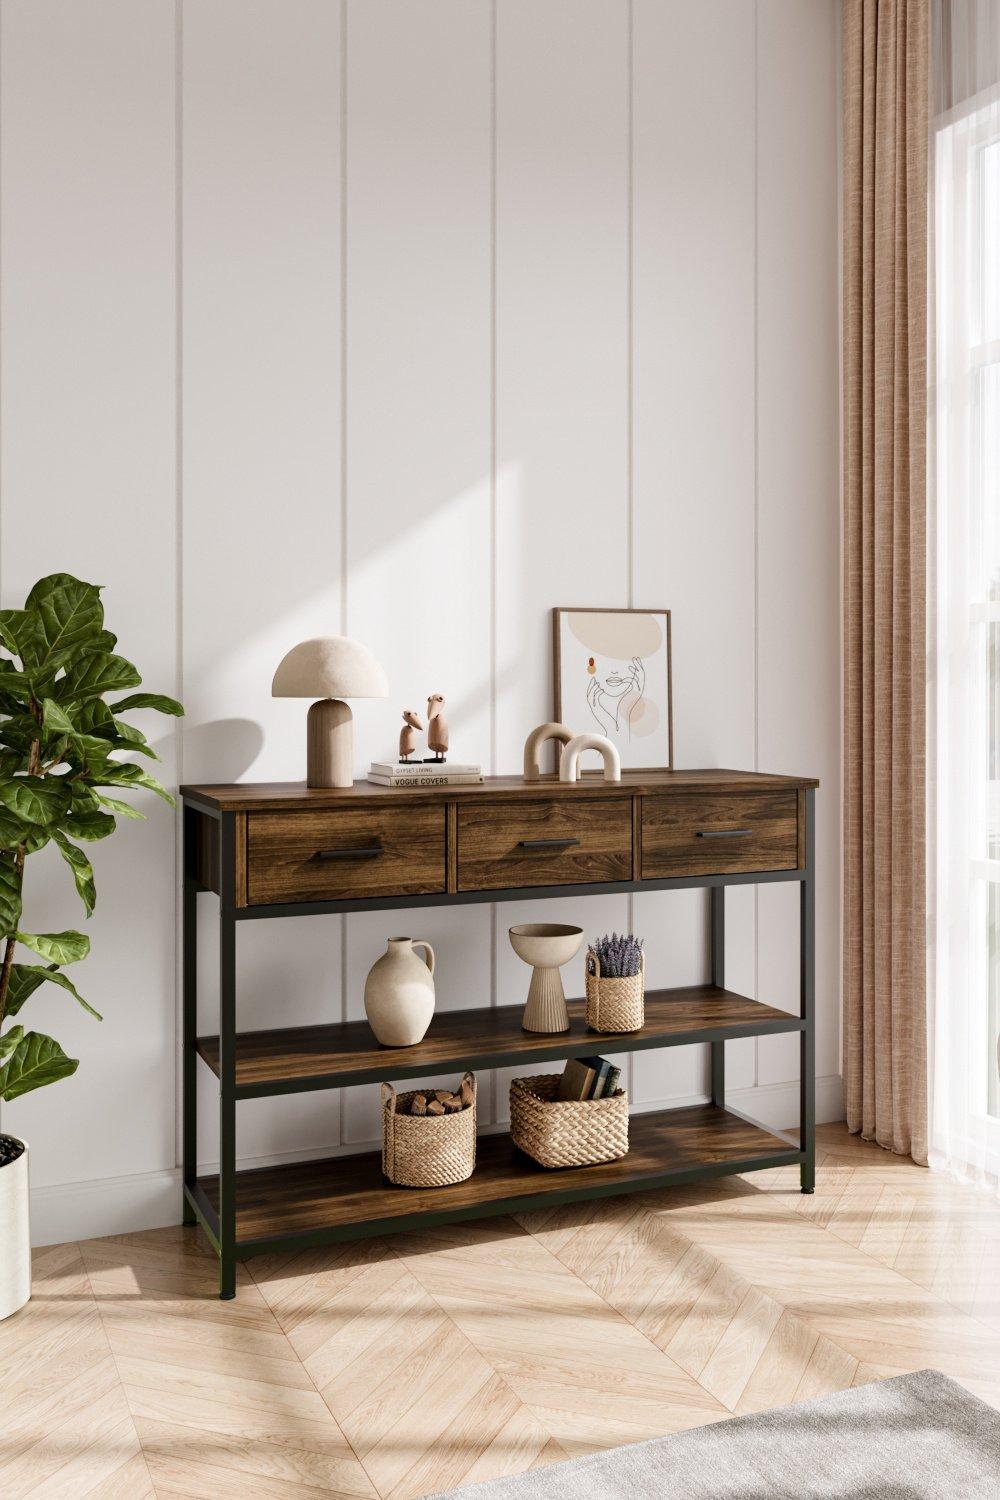 Vintage Console Table with Drawers and Shelves